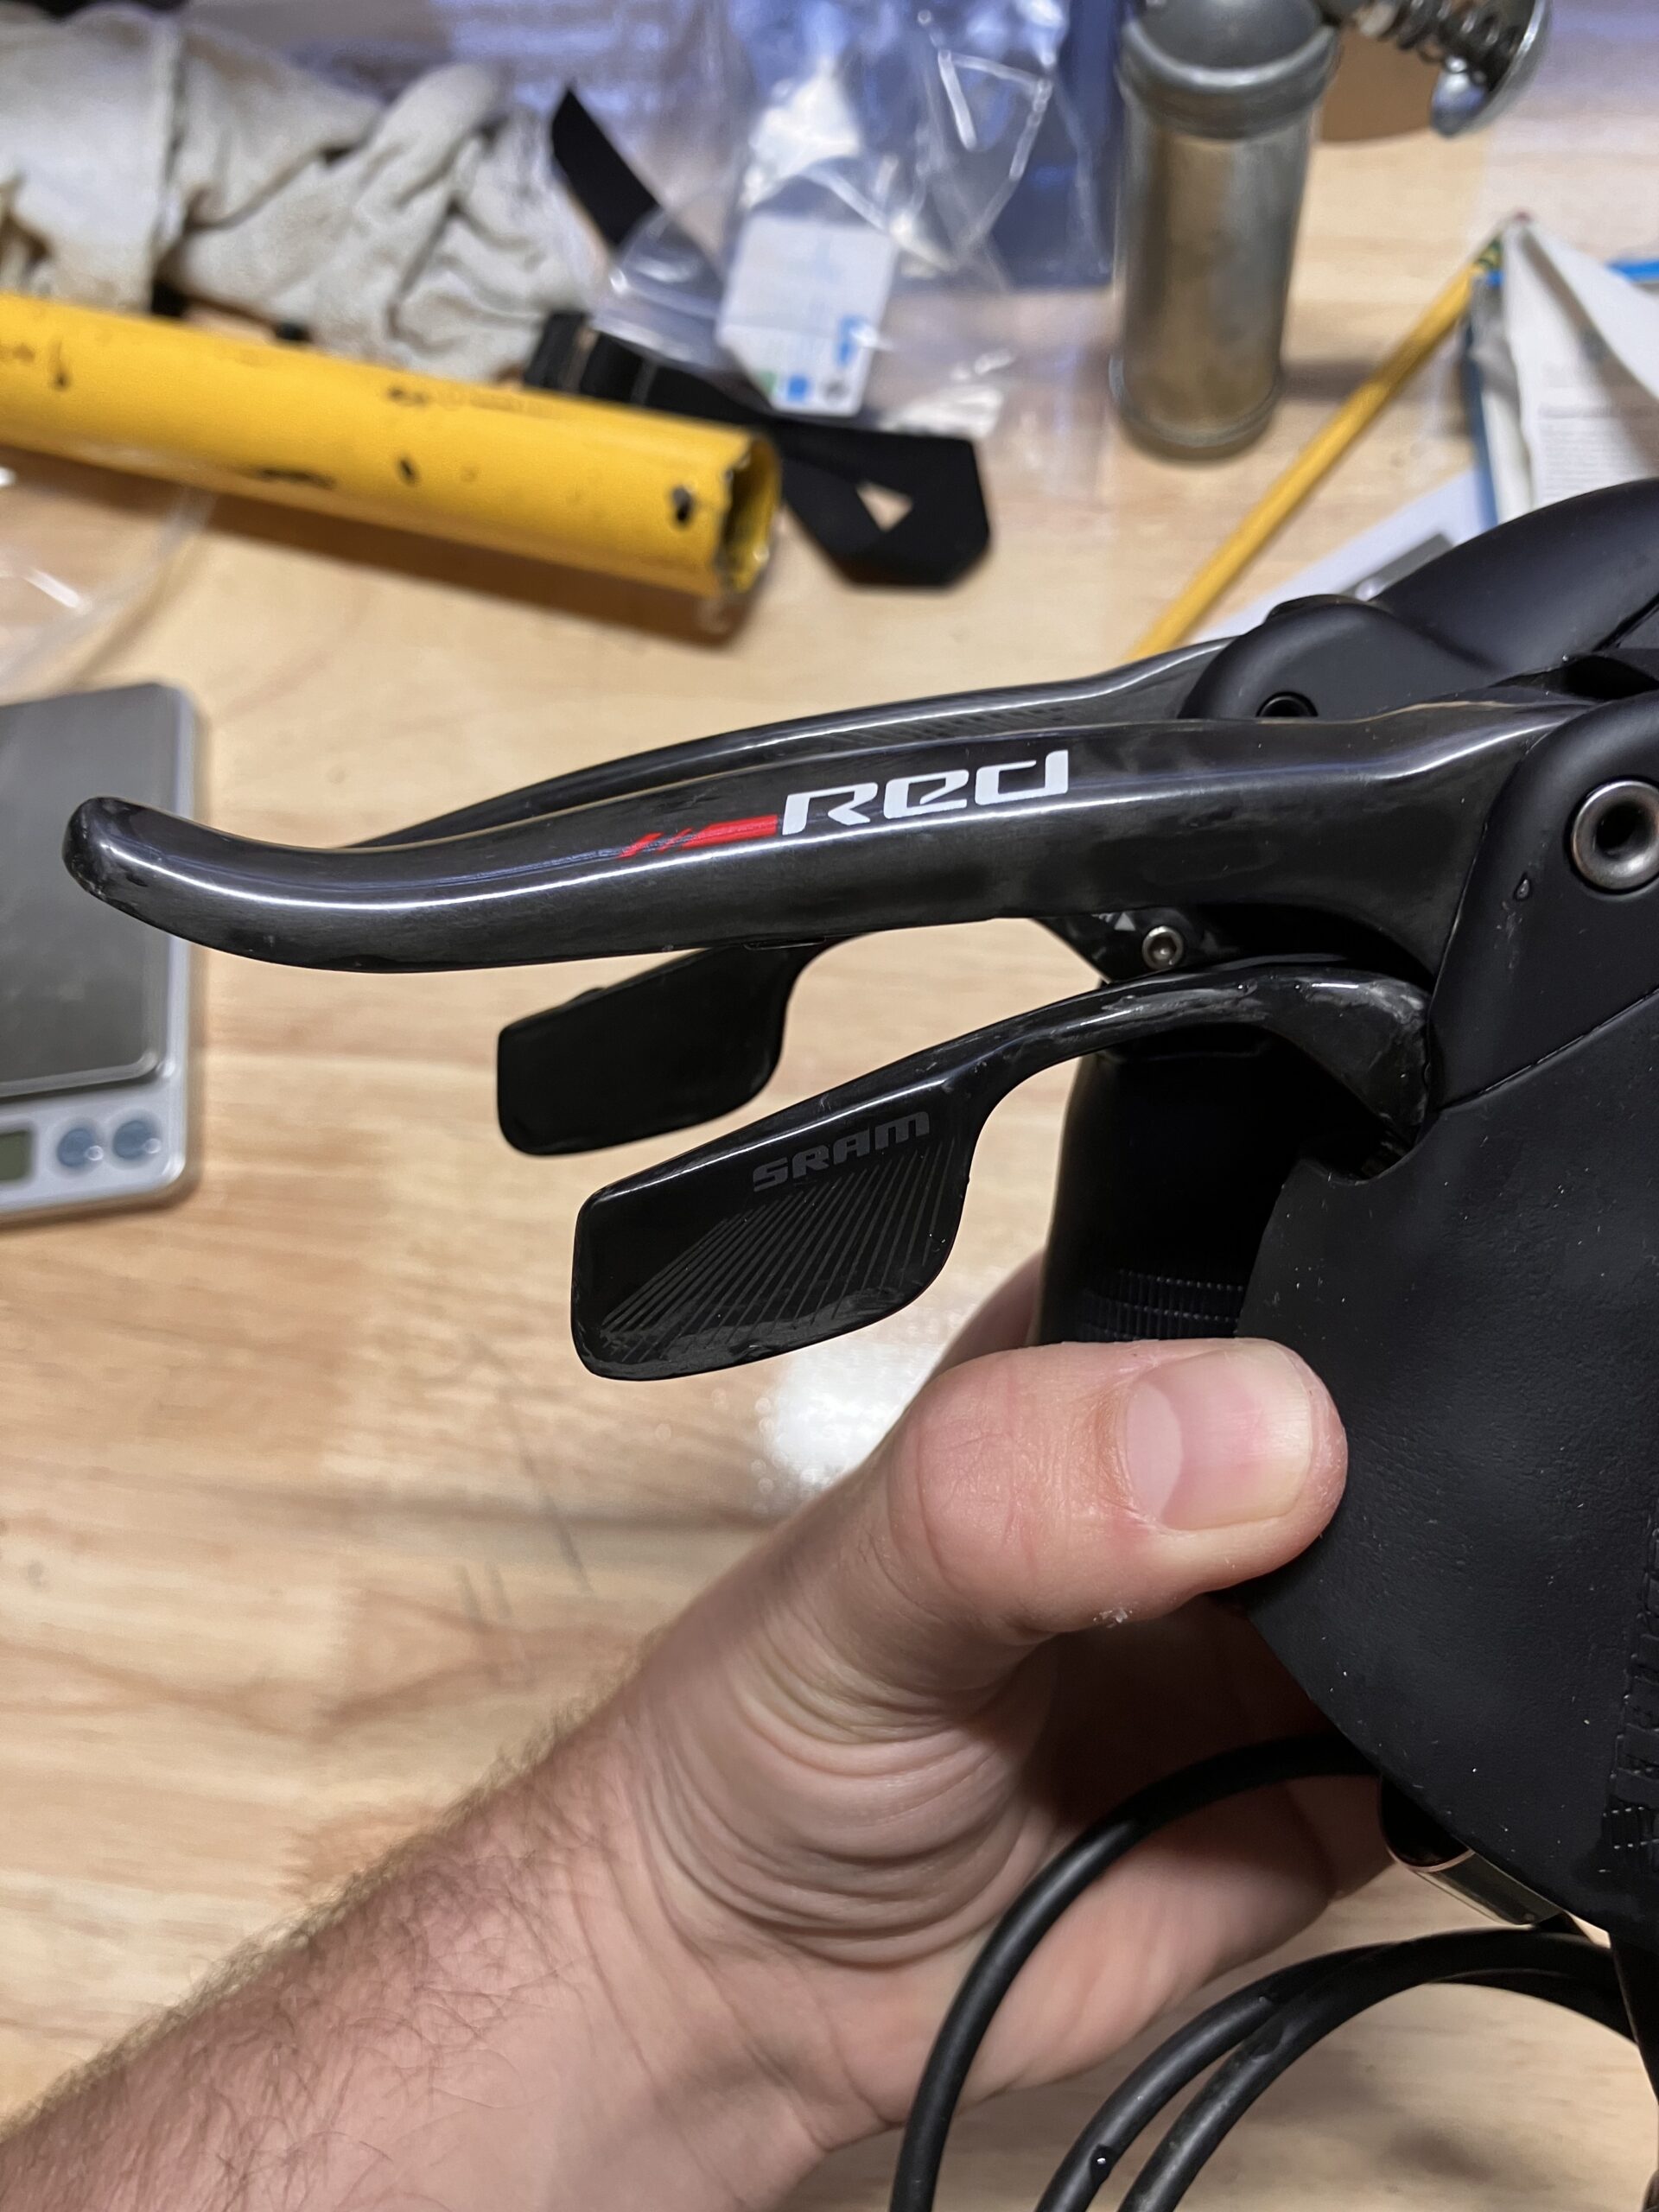 Sram Red 22 Hydr Flat Mount Disc with 12 speed Ratio Shifting